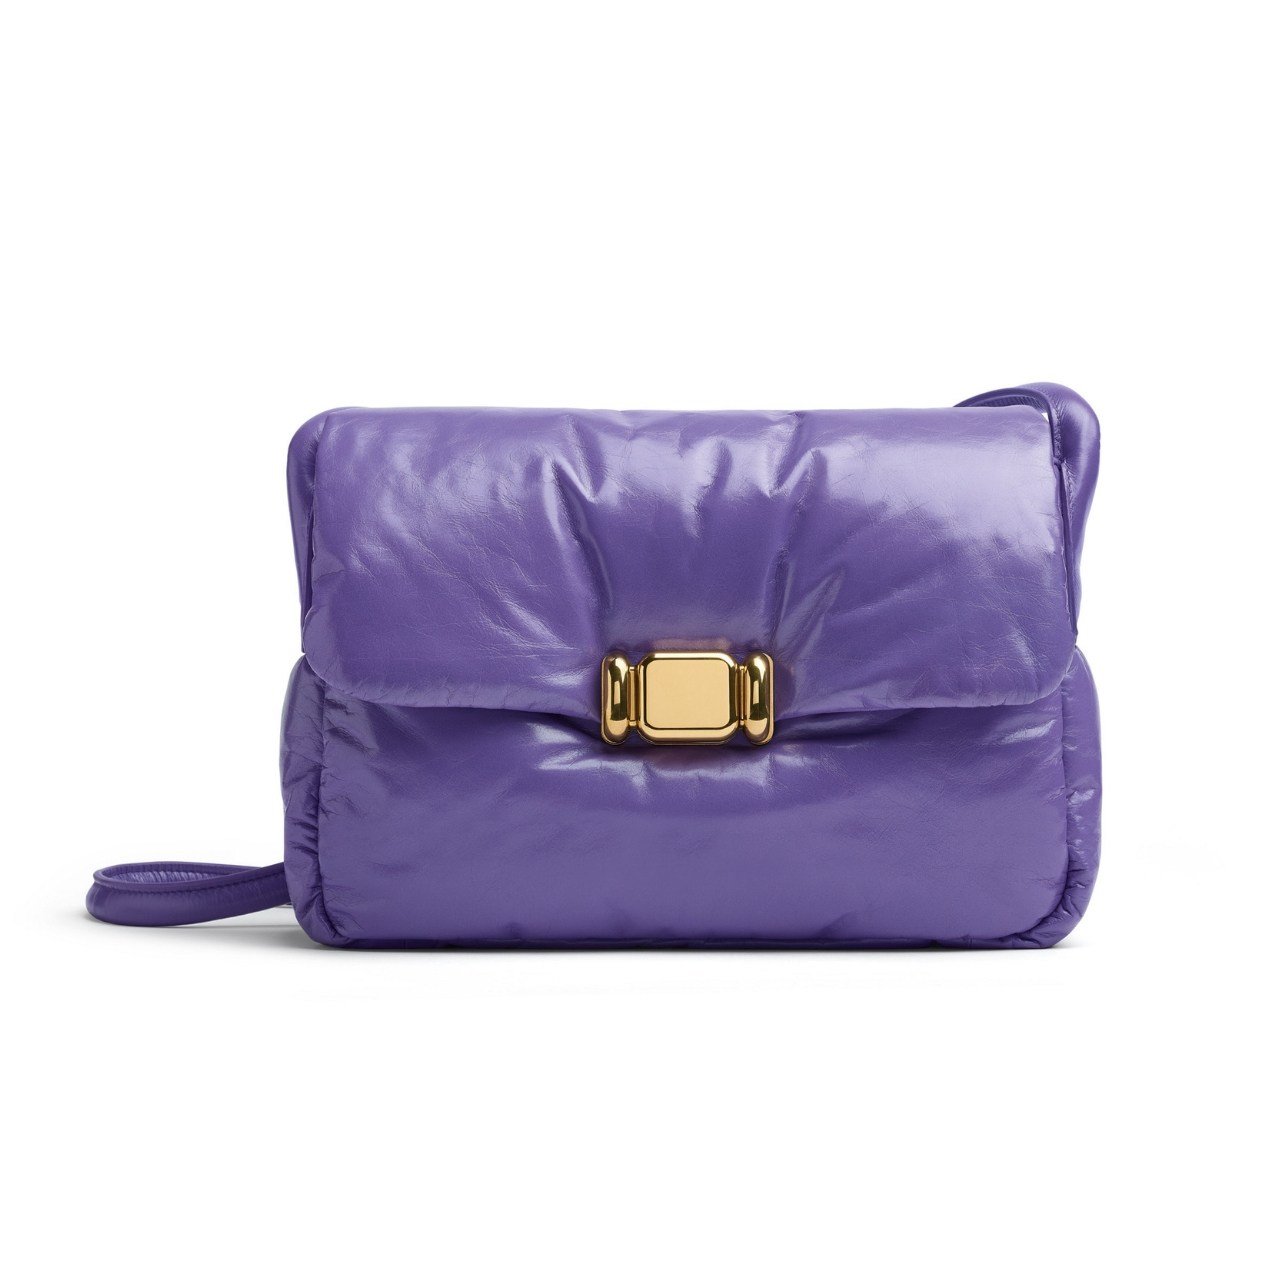 Purple padded bag with a gold closure